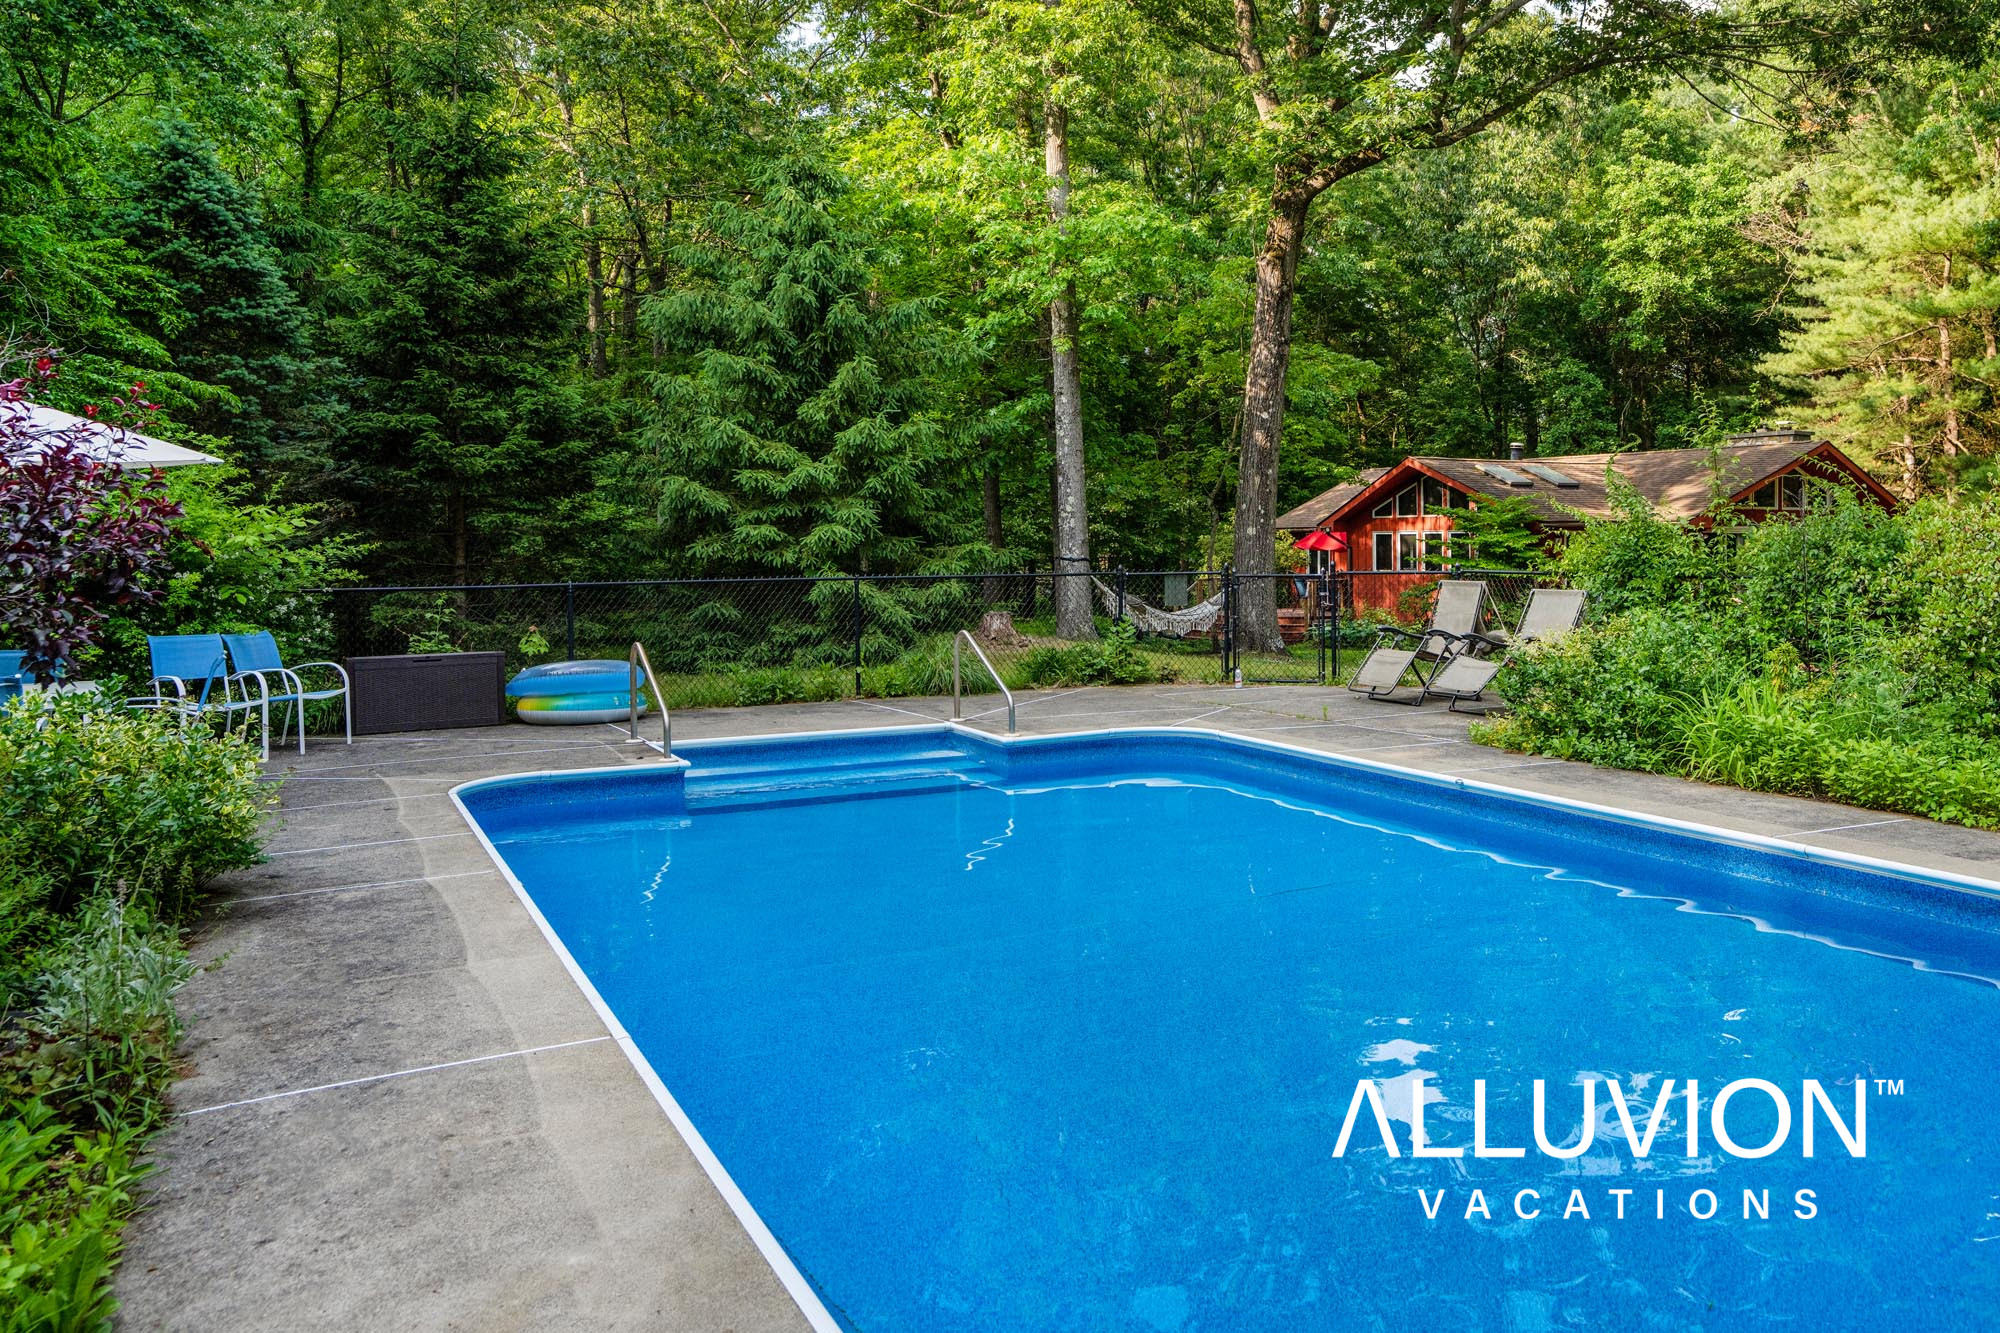 Find serenity at Alluvion Vacations’ Private Getaway Airbnb Cabin with a Pool near Hudson, NY